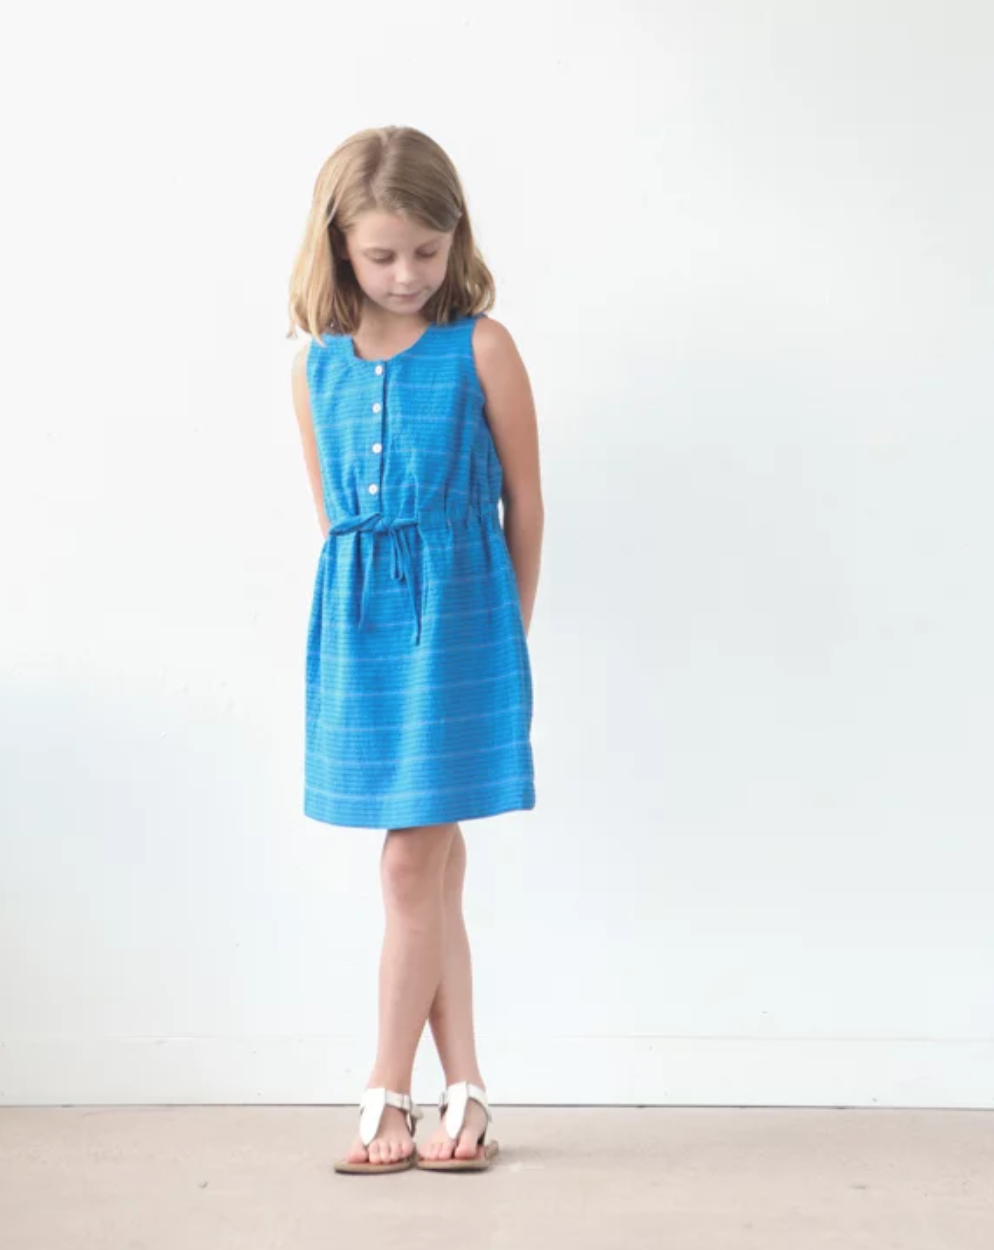 Girl wearing the Mini Southport Dress sewing pattern by True Bias. A sleeveless, tank style dress pattern made in cotton voile, cotton, linen or double gauze fabric featuring a front button opening and combination elastic and drawstring waist.